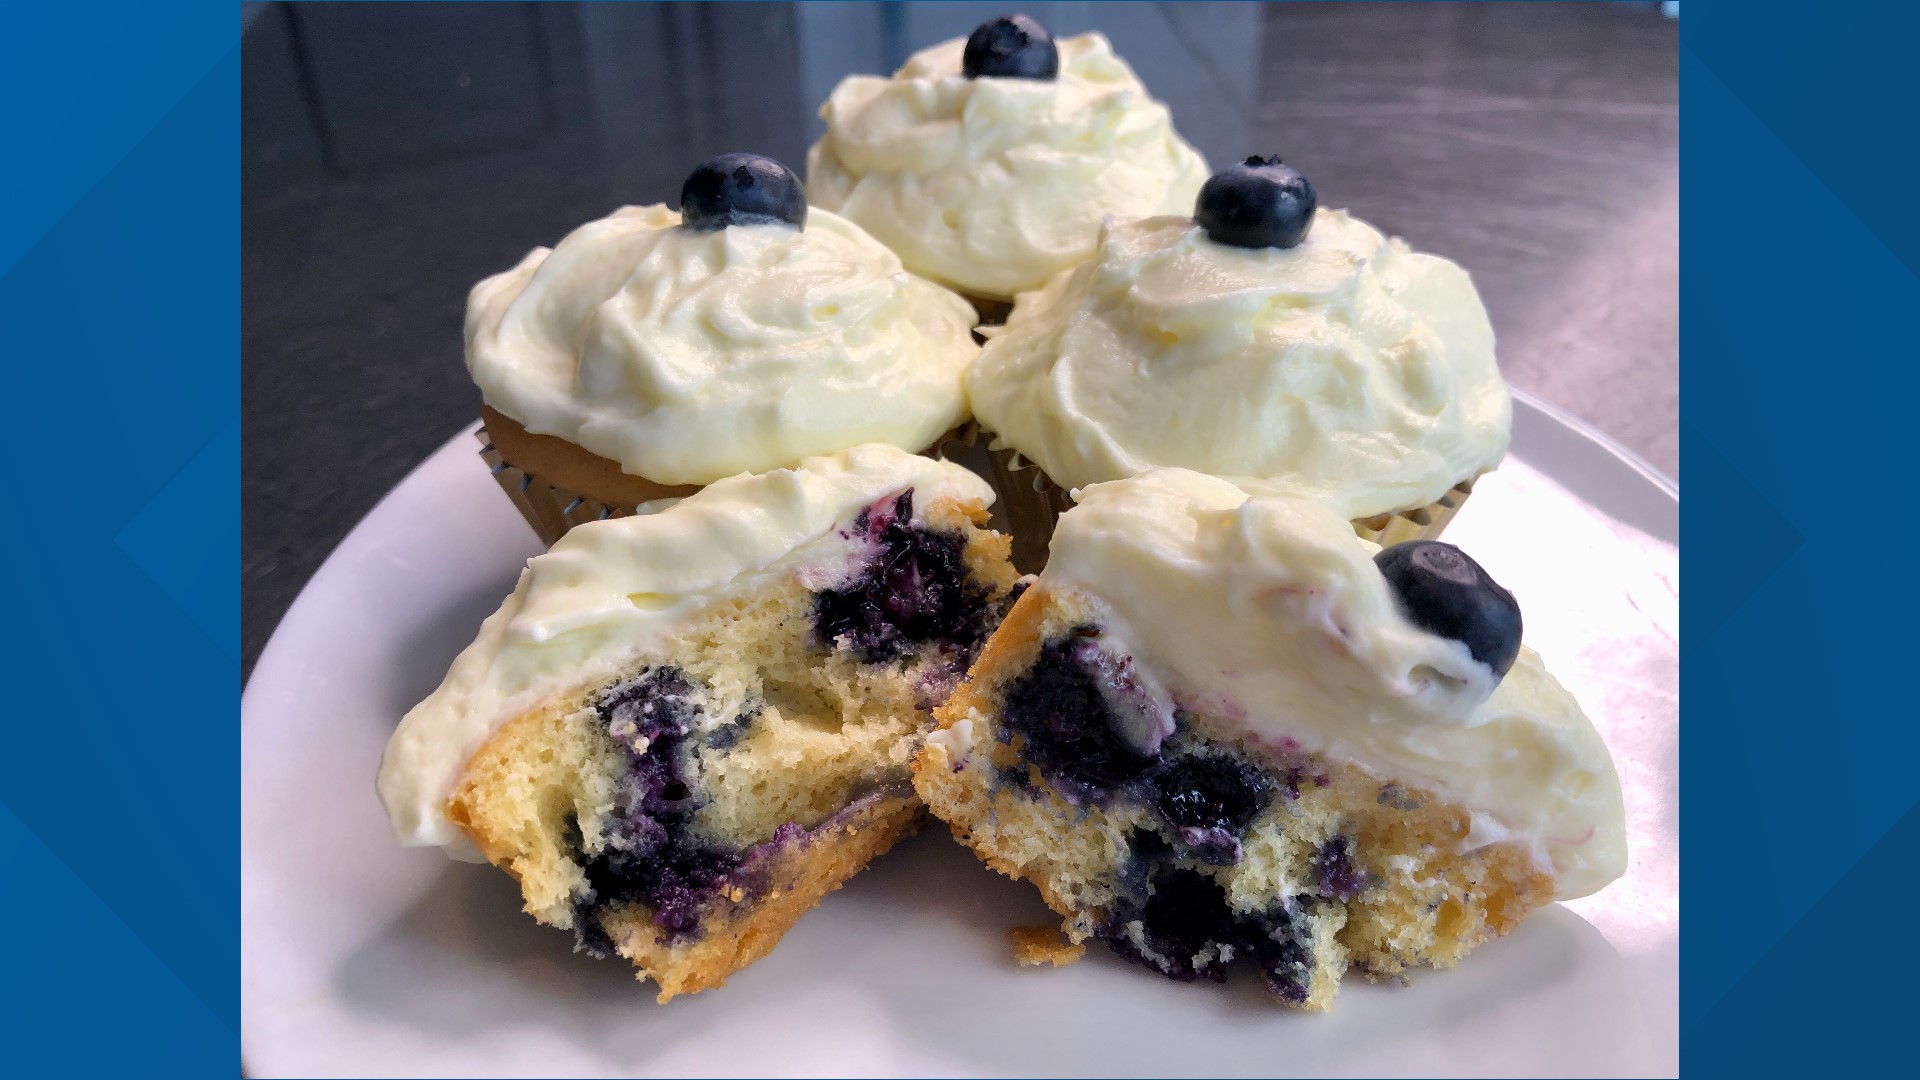 Brittany is sharing a recipe that will satisfy your sweet tooth on National Pick Blueberries Day